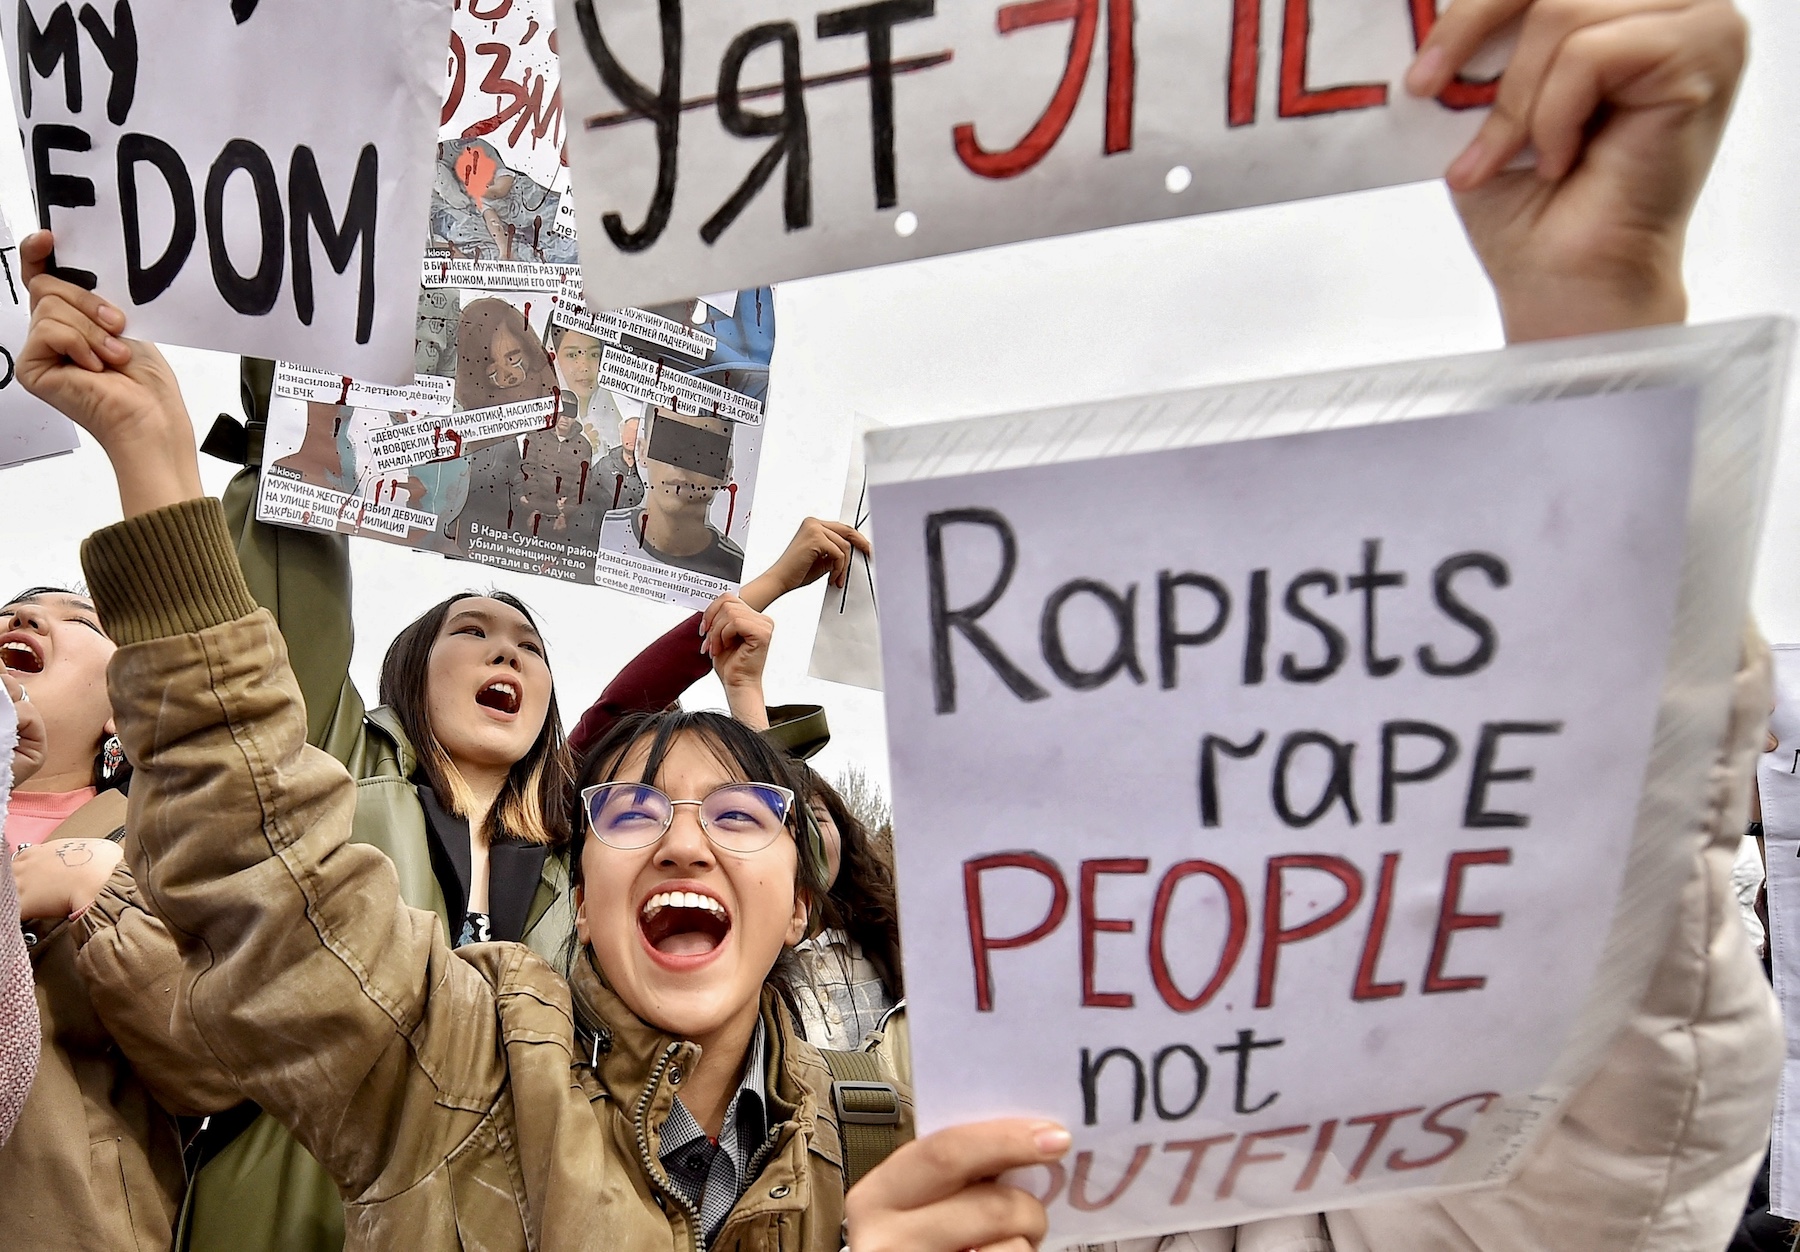 A woman appears to be shouting, and other women around her do the same. In front of her there is a sign that says, "Rapists rape people not outfits".